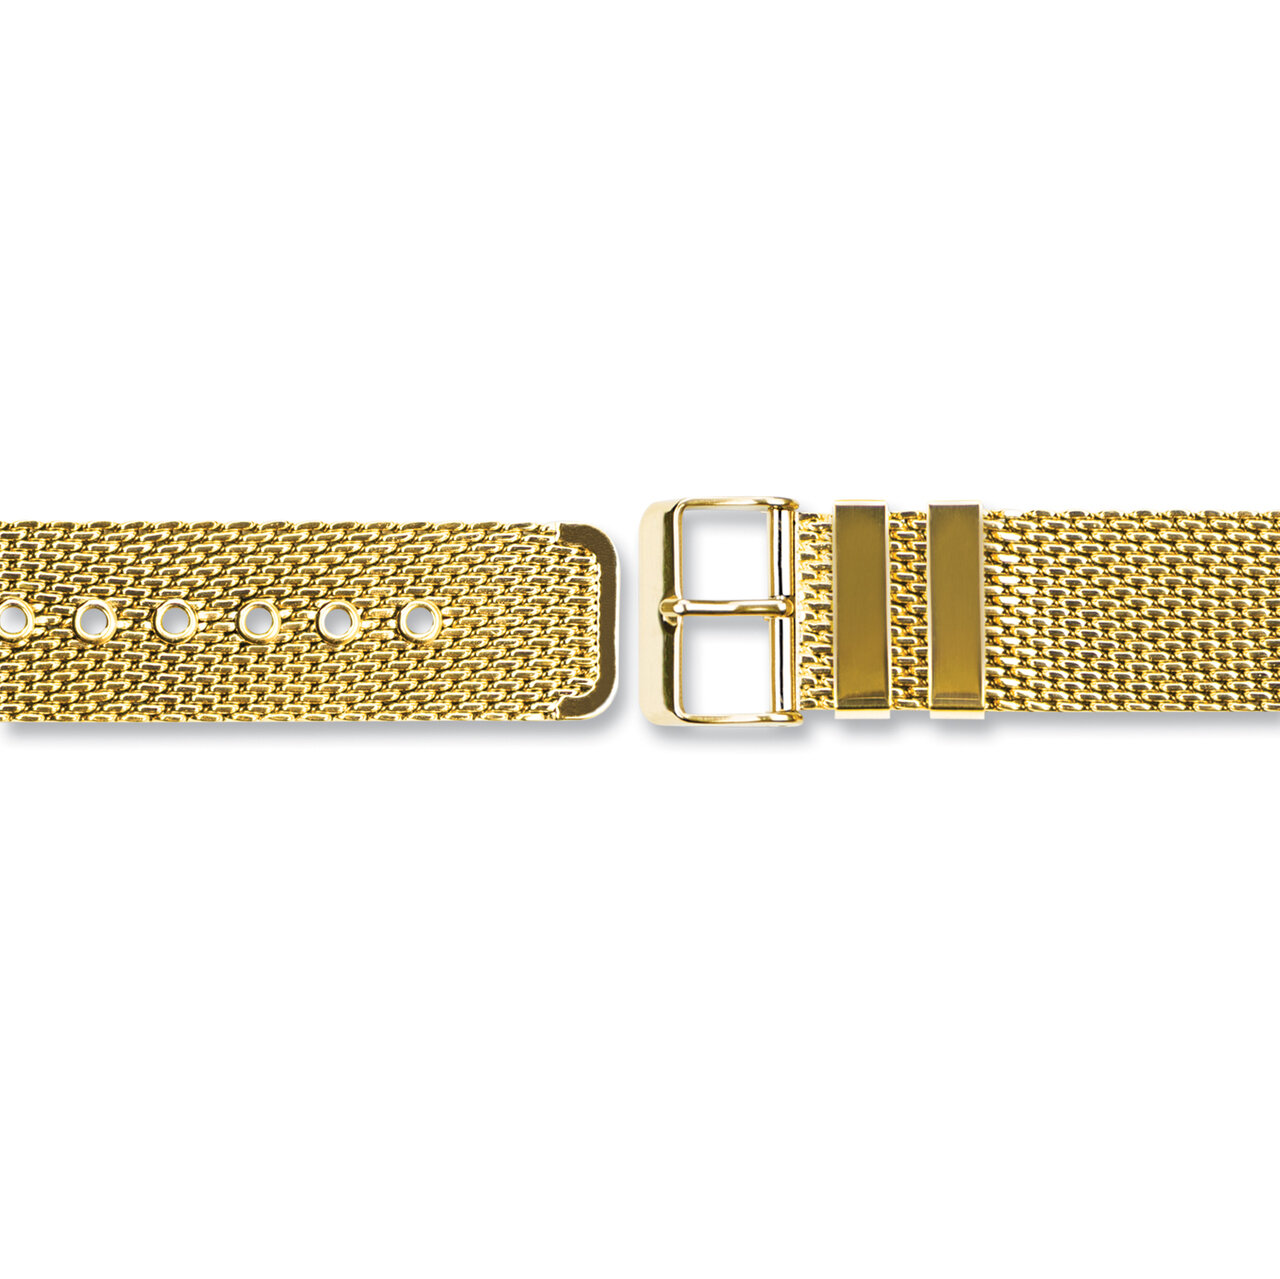 18mm Gold-tone Stainless Steel Mesh 2-Piece Watch Band BA414-18